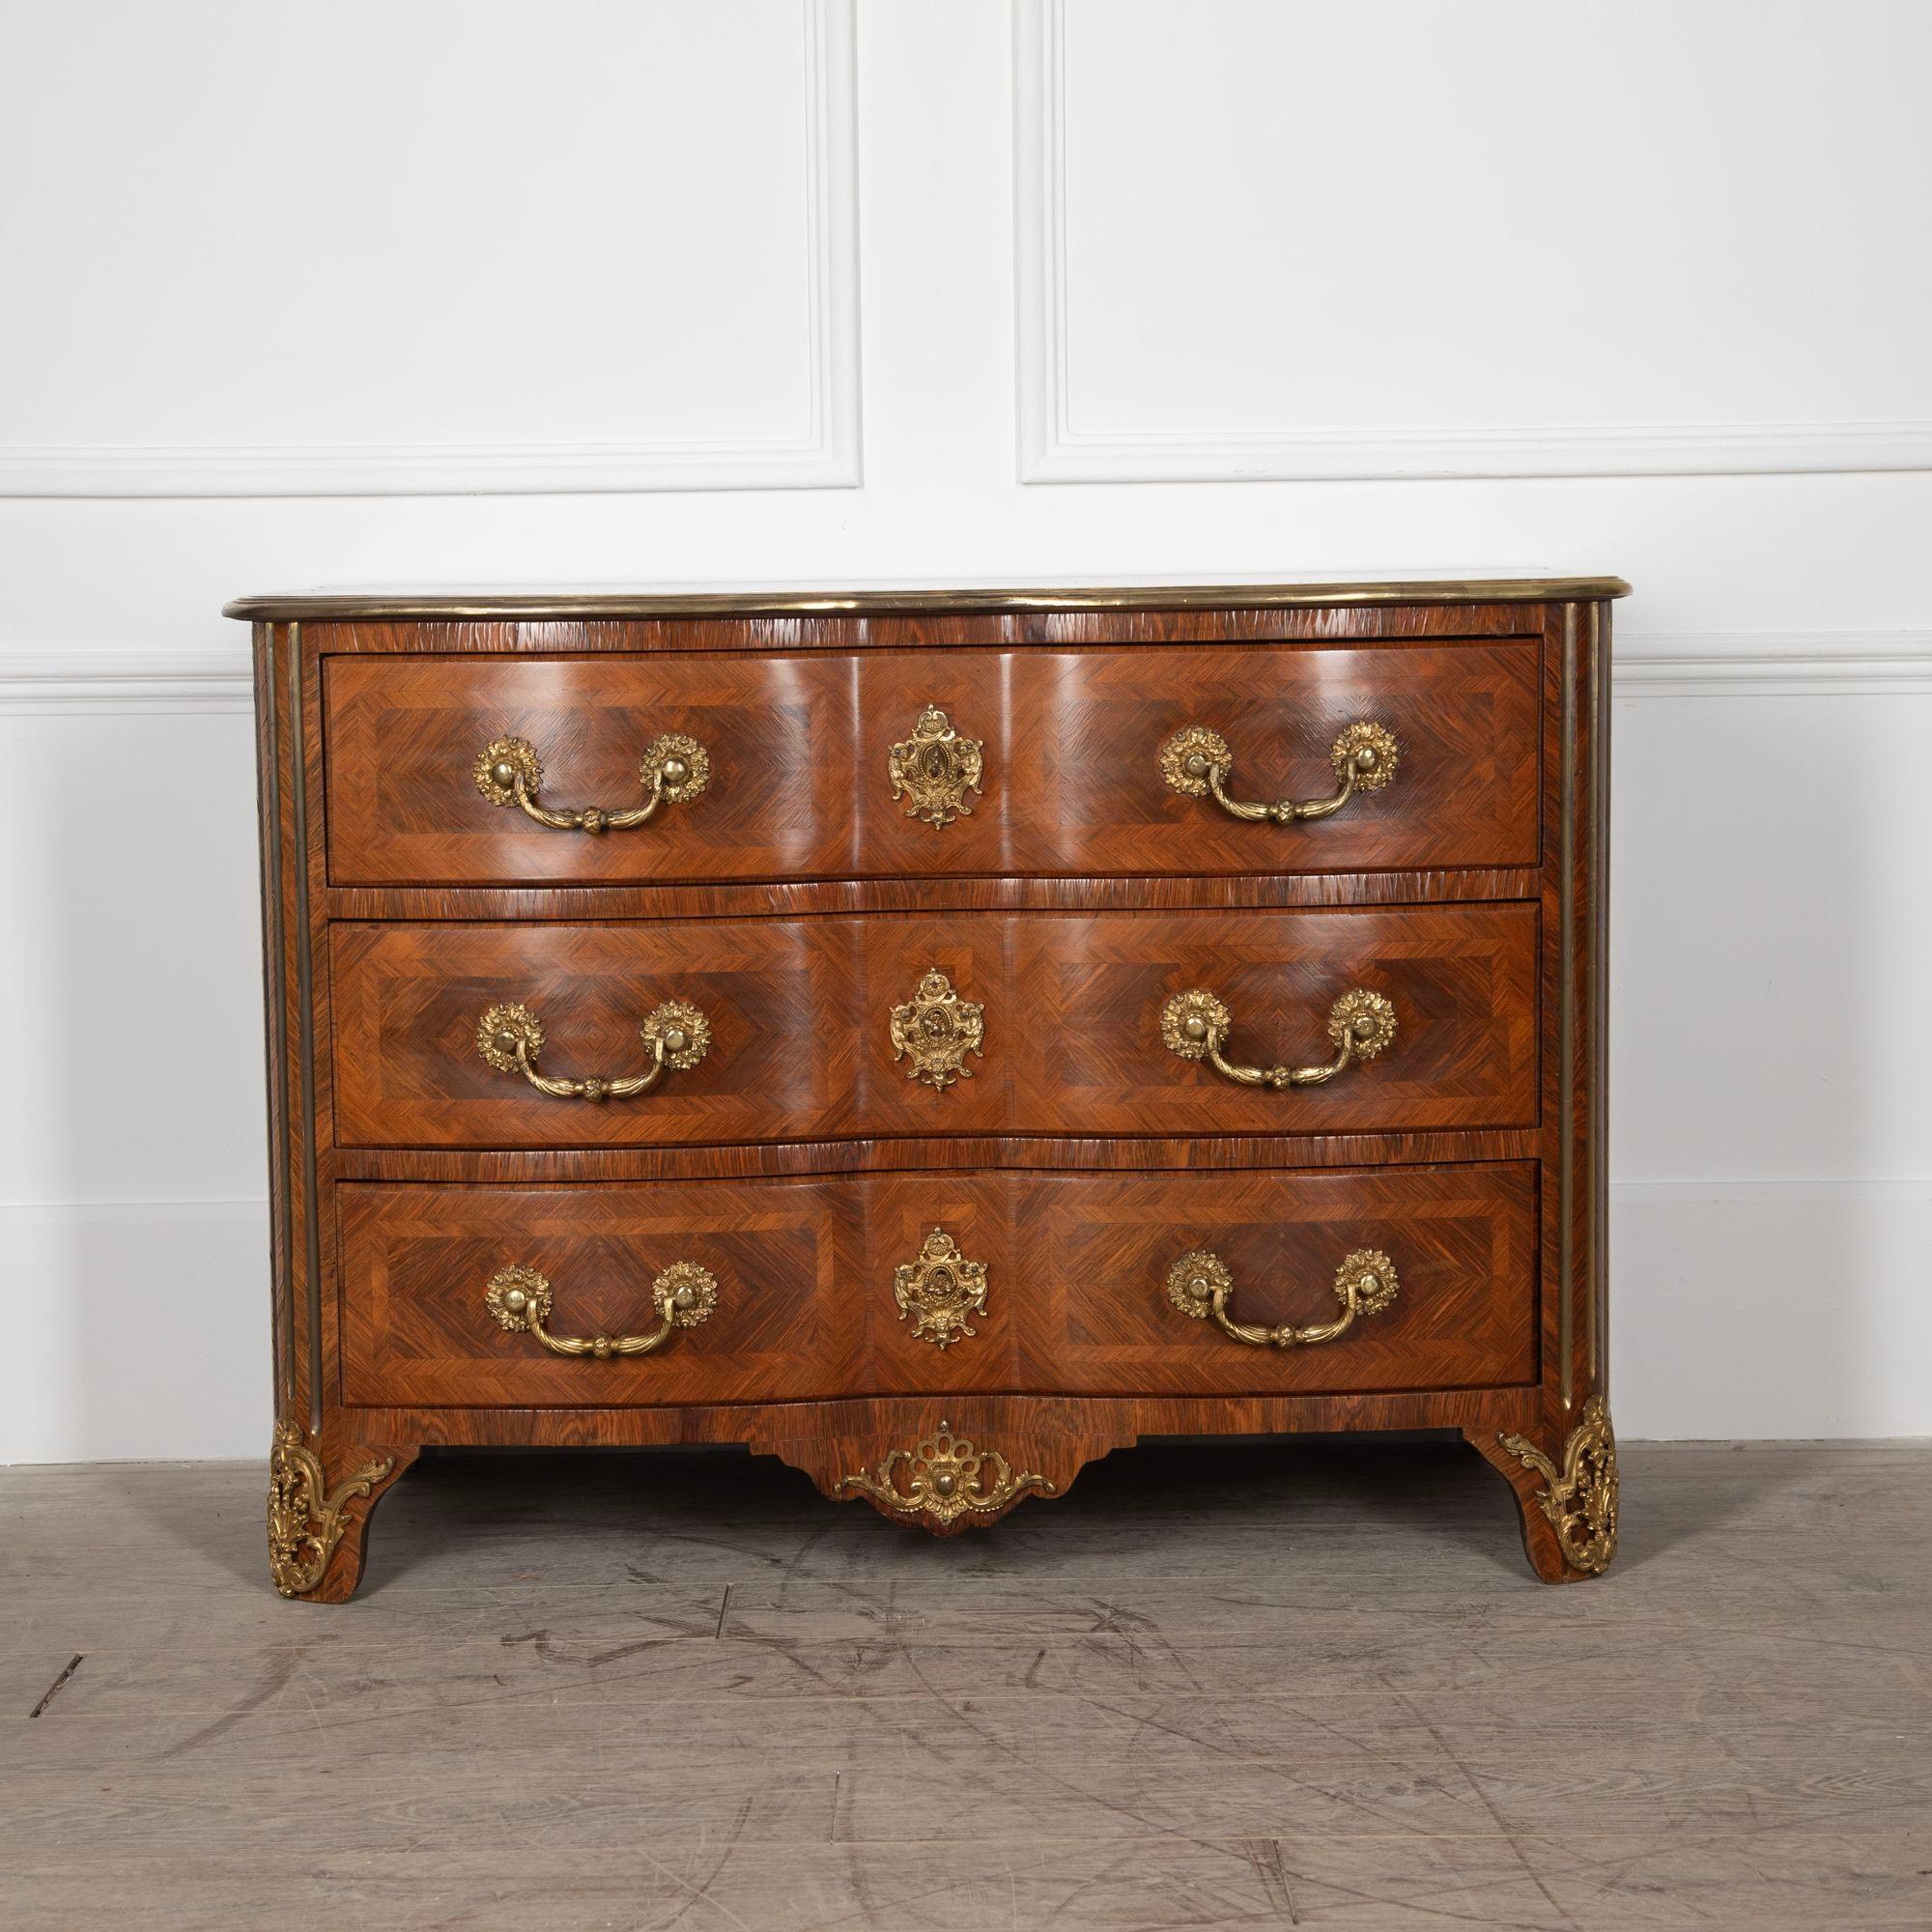 Mid 20th Century French Maison Jansen commode.

In the regency style with bronze mounts and kingwood veneer.

(Book on this item: Jansen Furniture By James Archer Abbott - page 248)